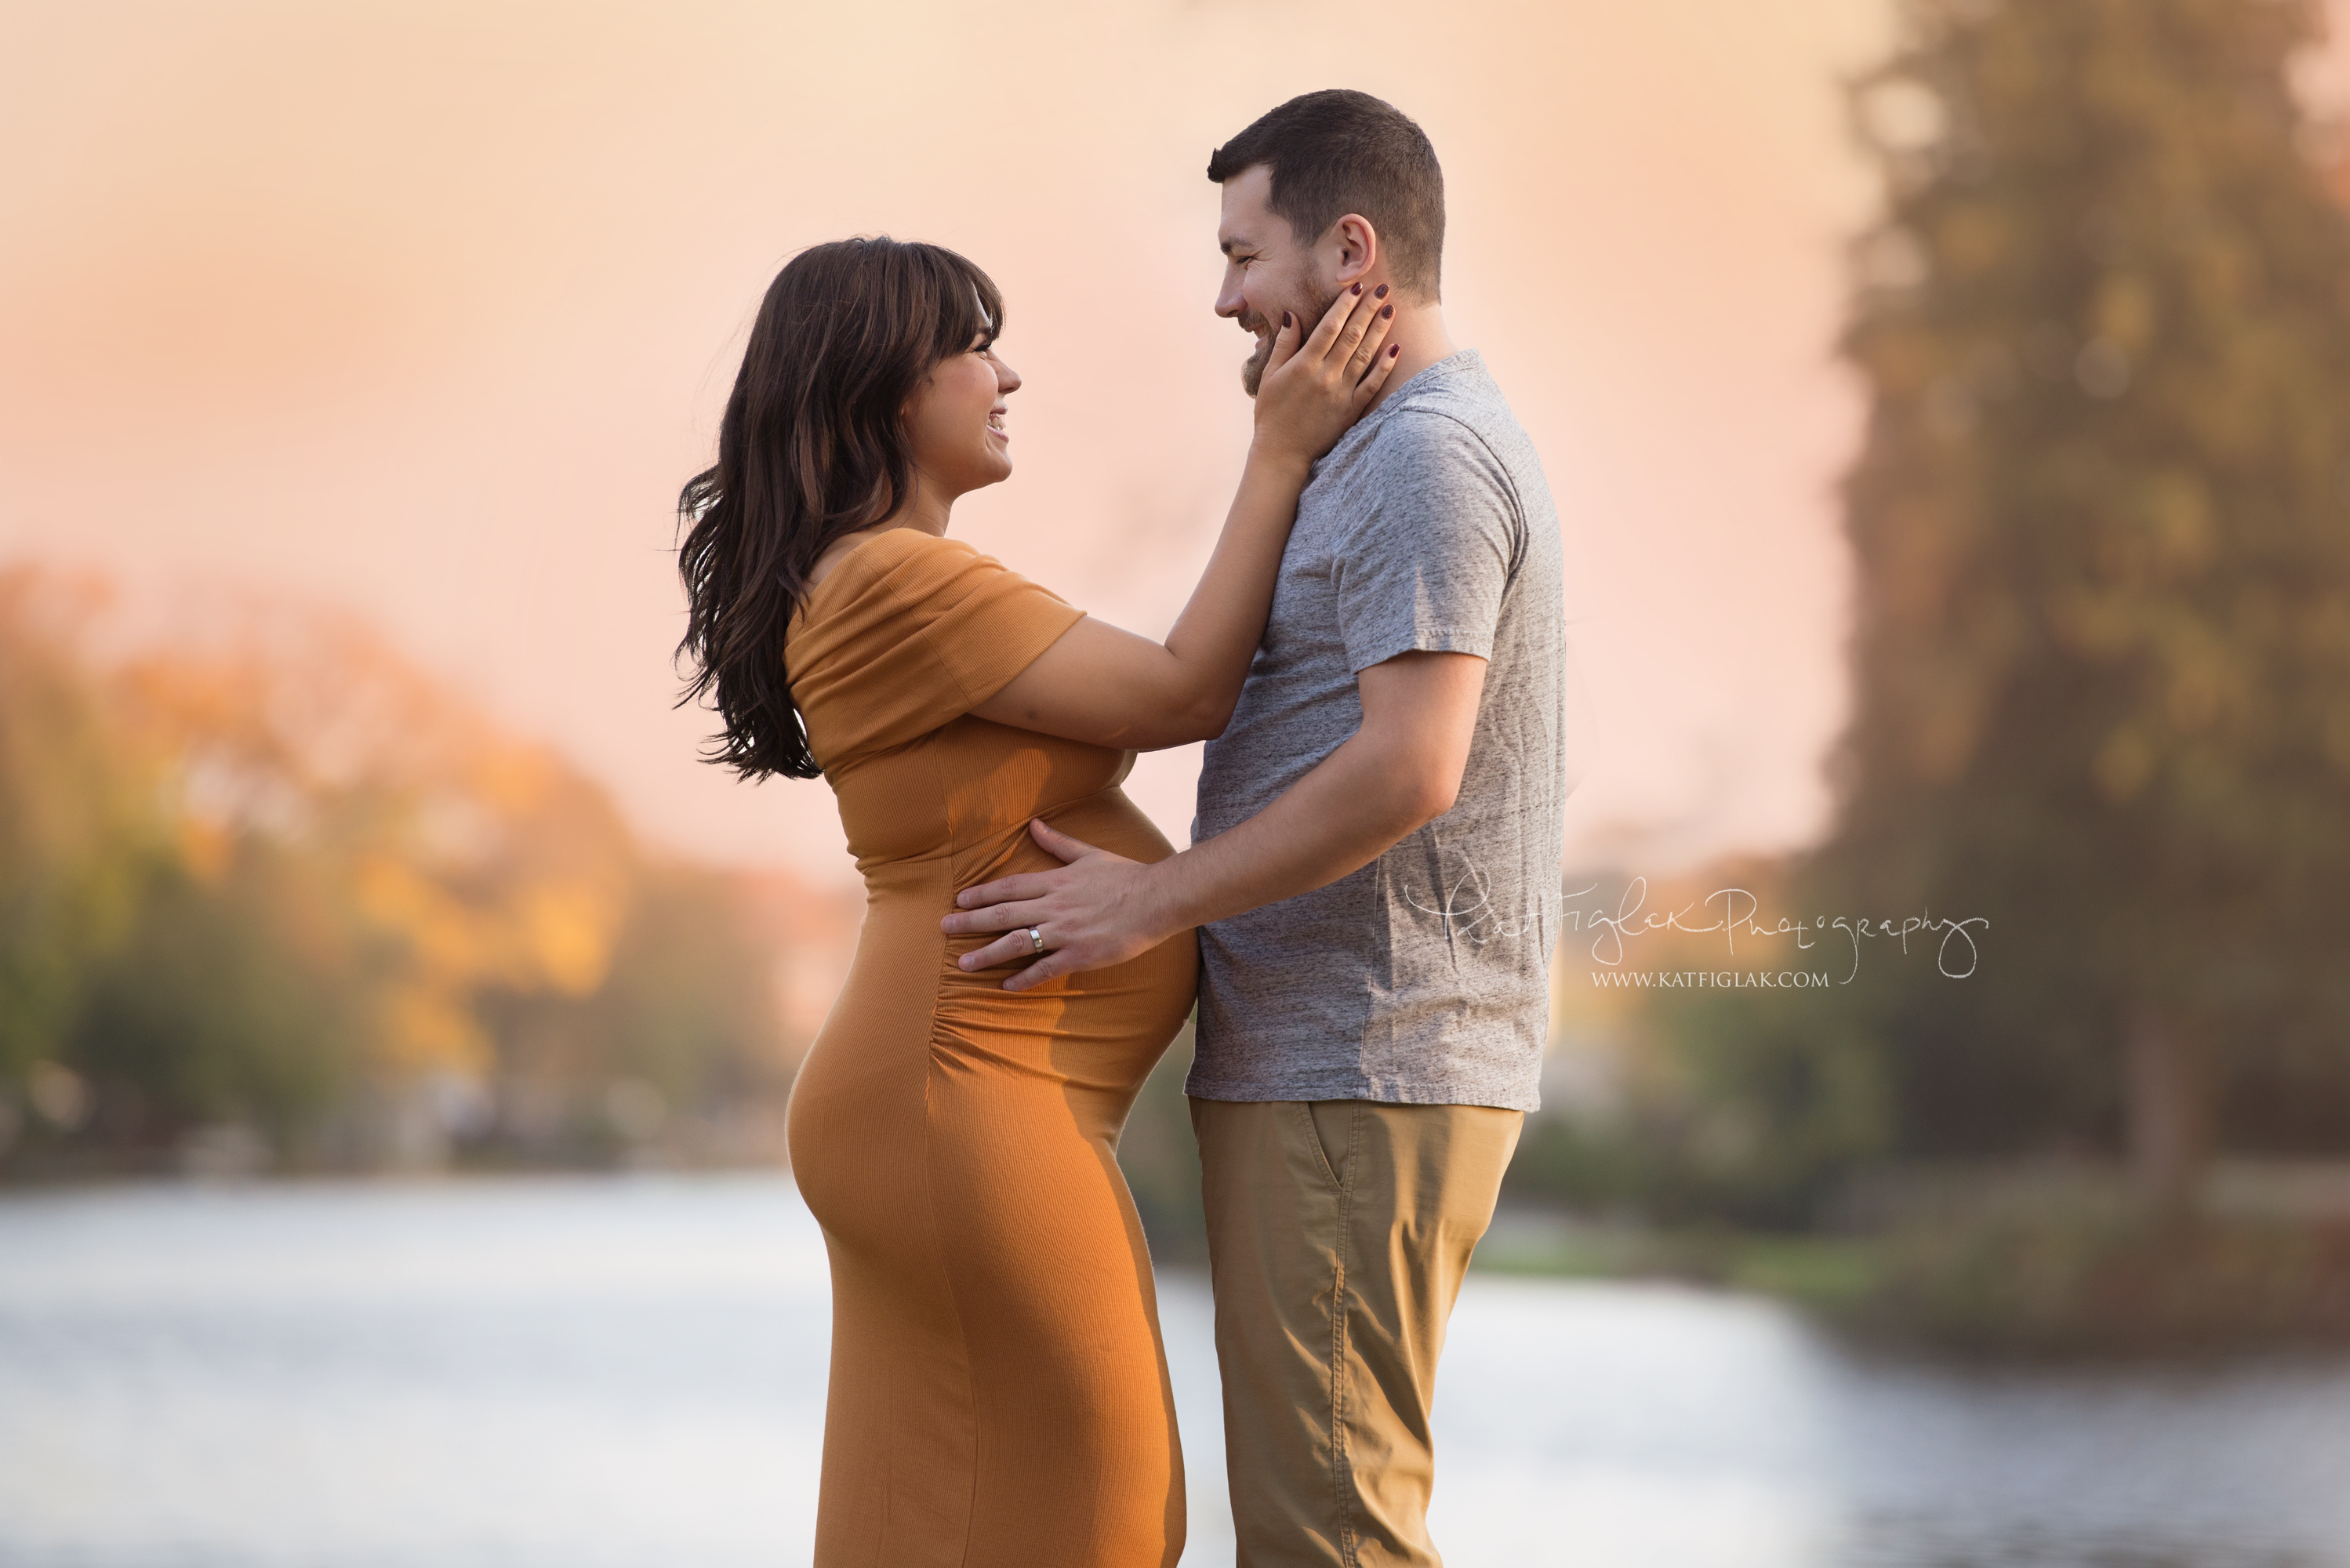 Expecting couple mom wearing a mustard color dress dad with his hands on her belly with sunset in the background